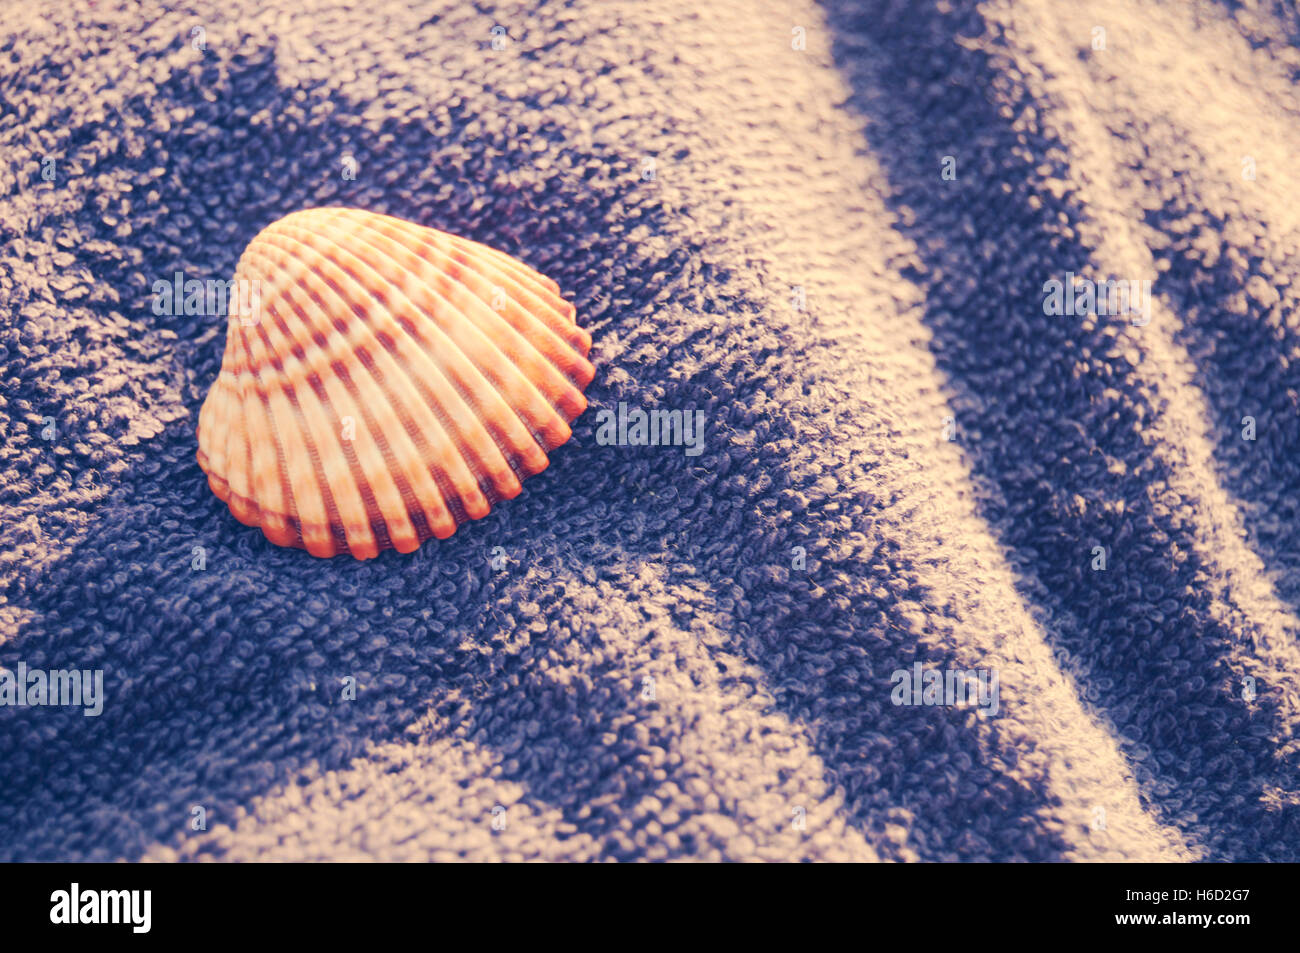 Shell resting on a towel Stock Photo